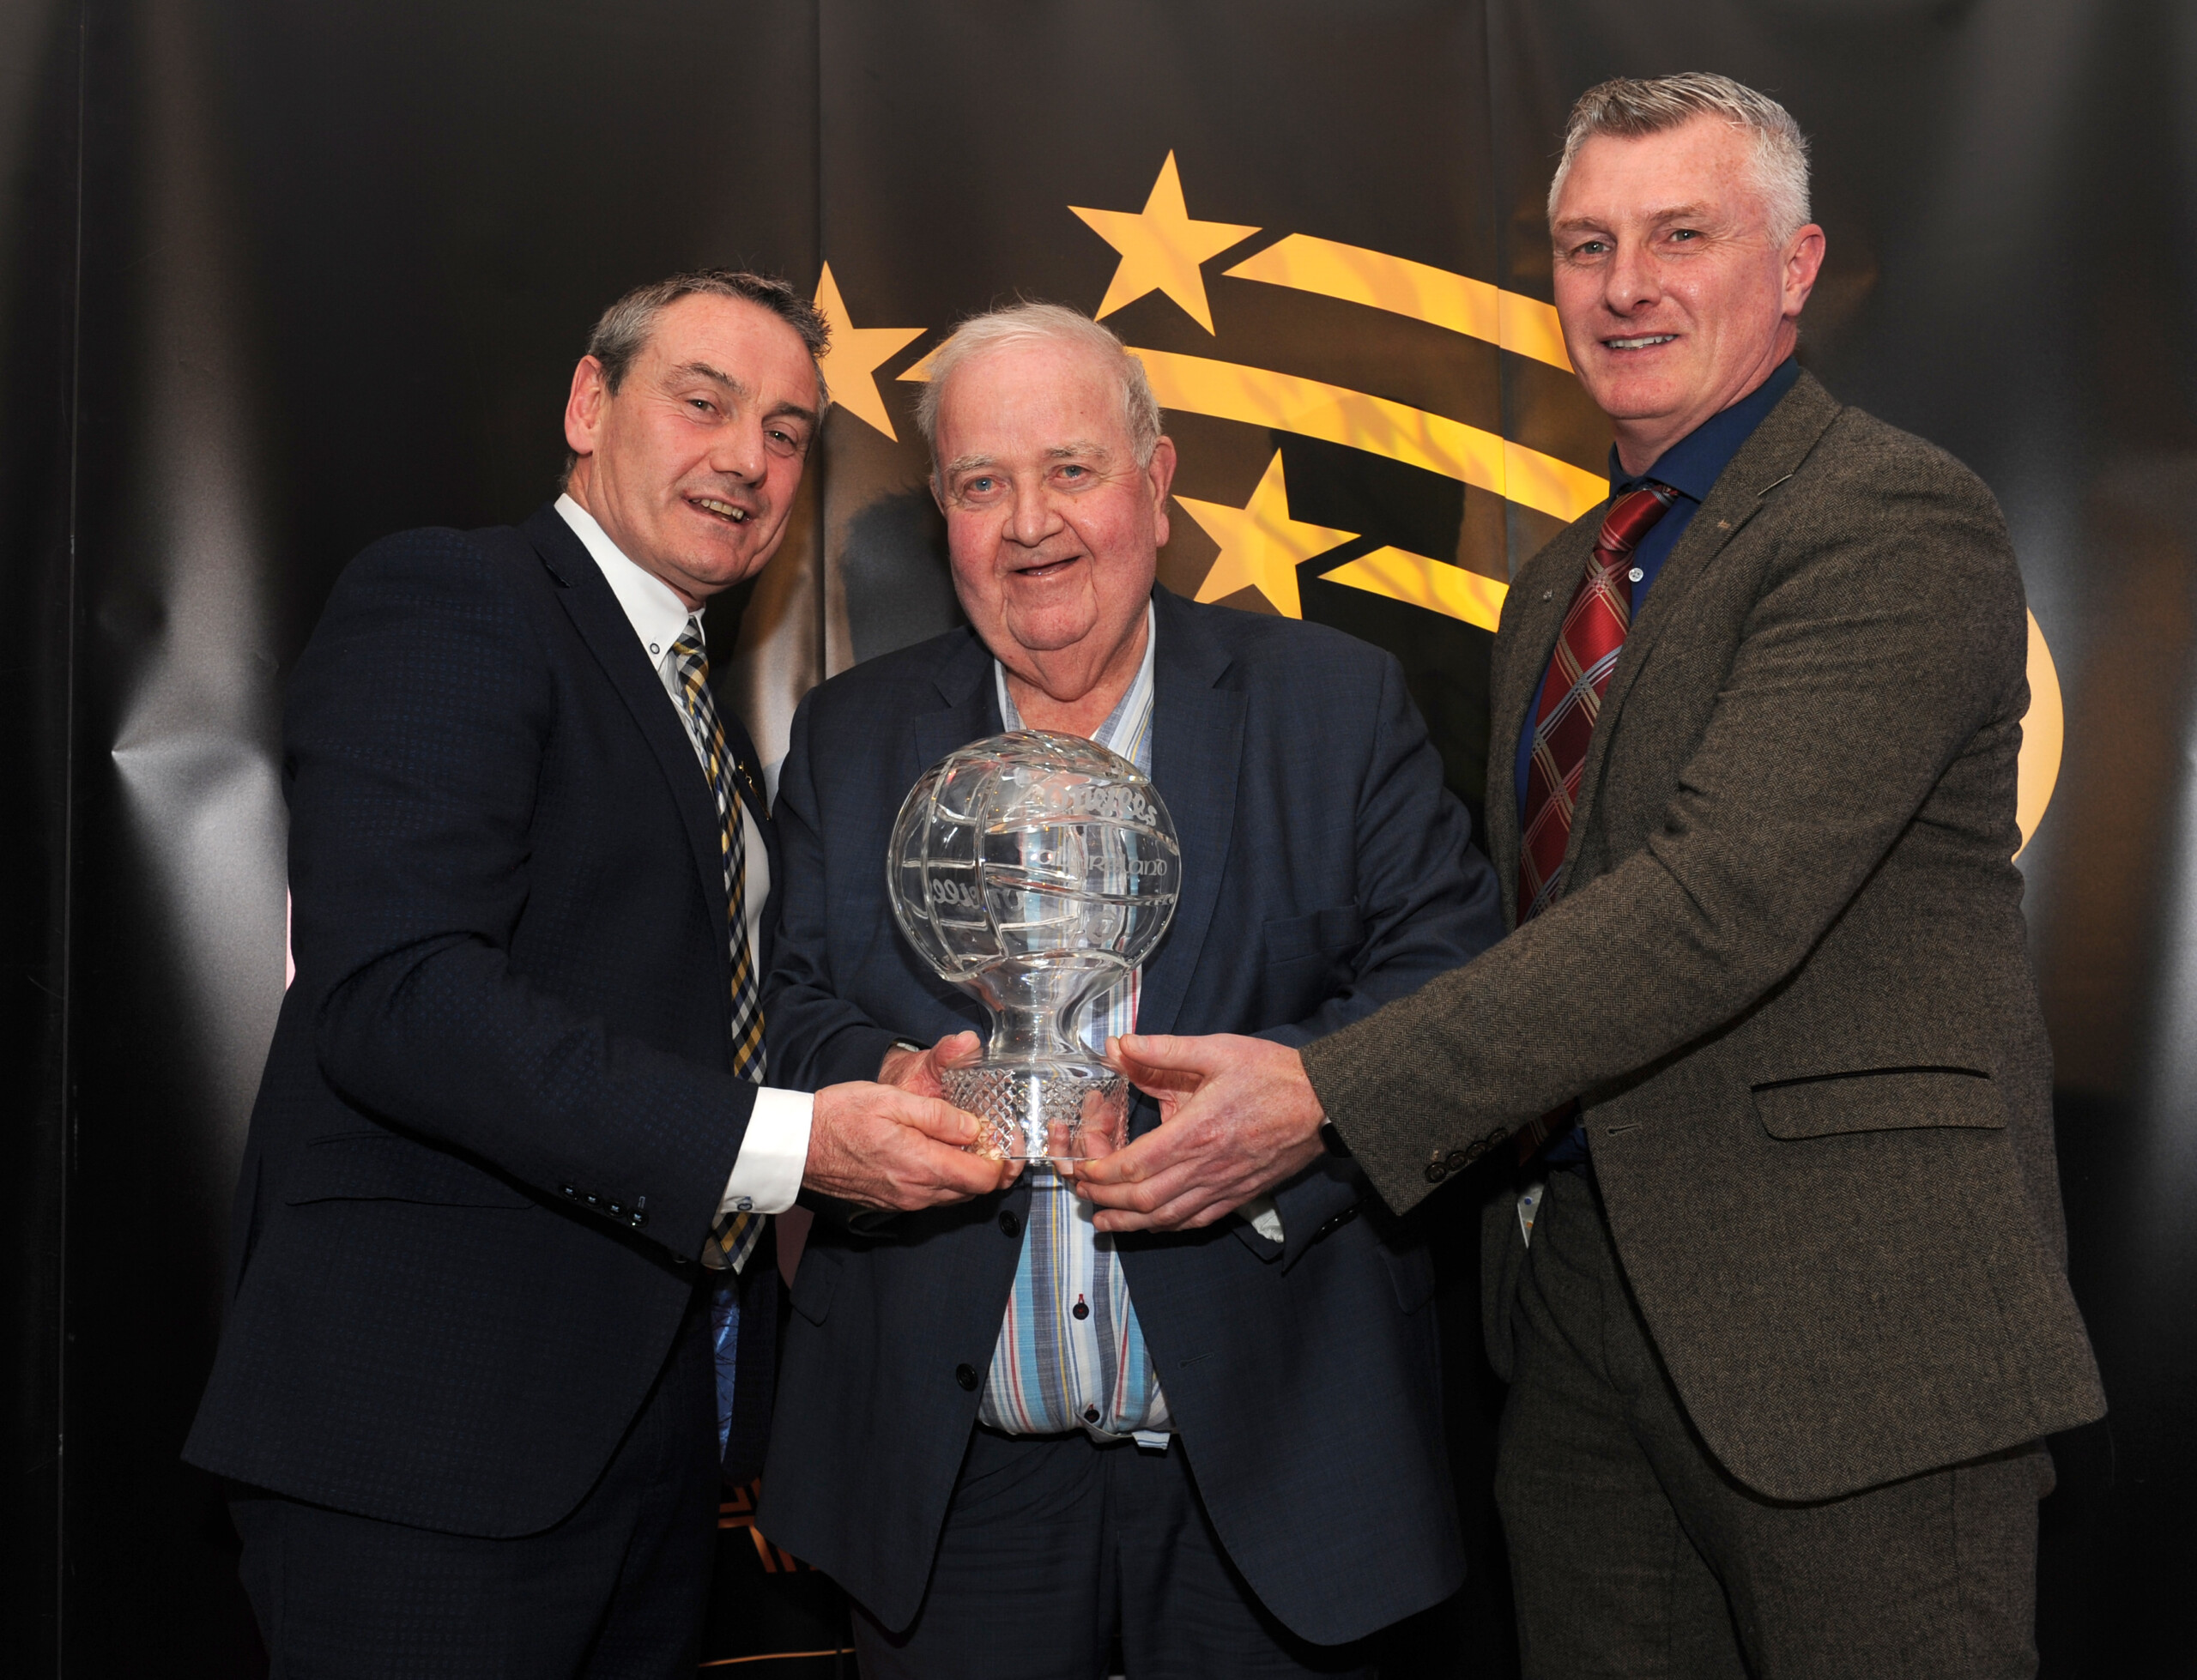 Gaels recognised at 2022 Ulster GAA Awards